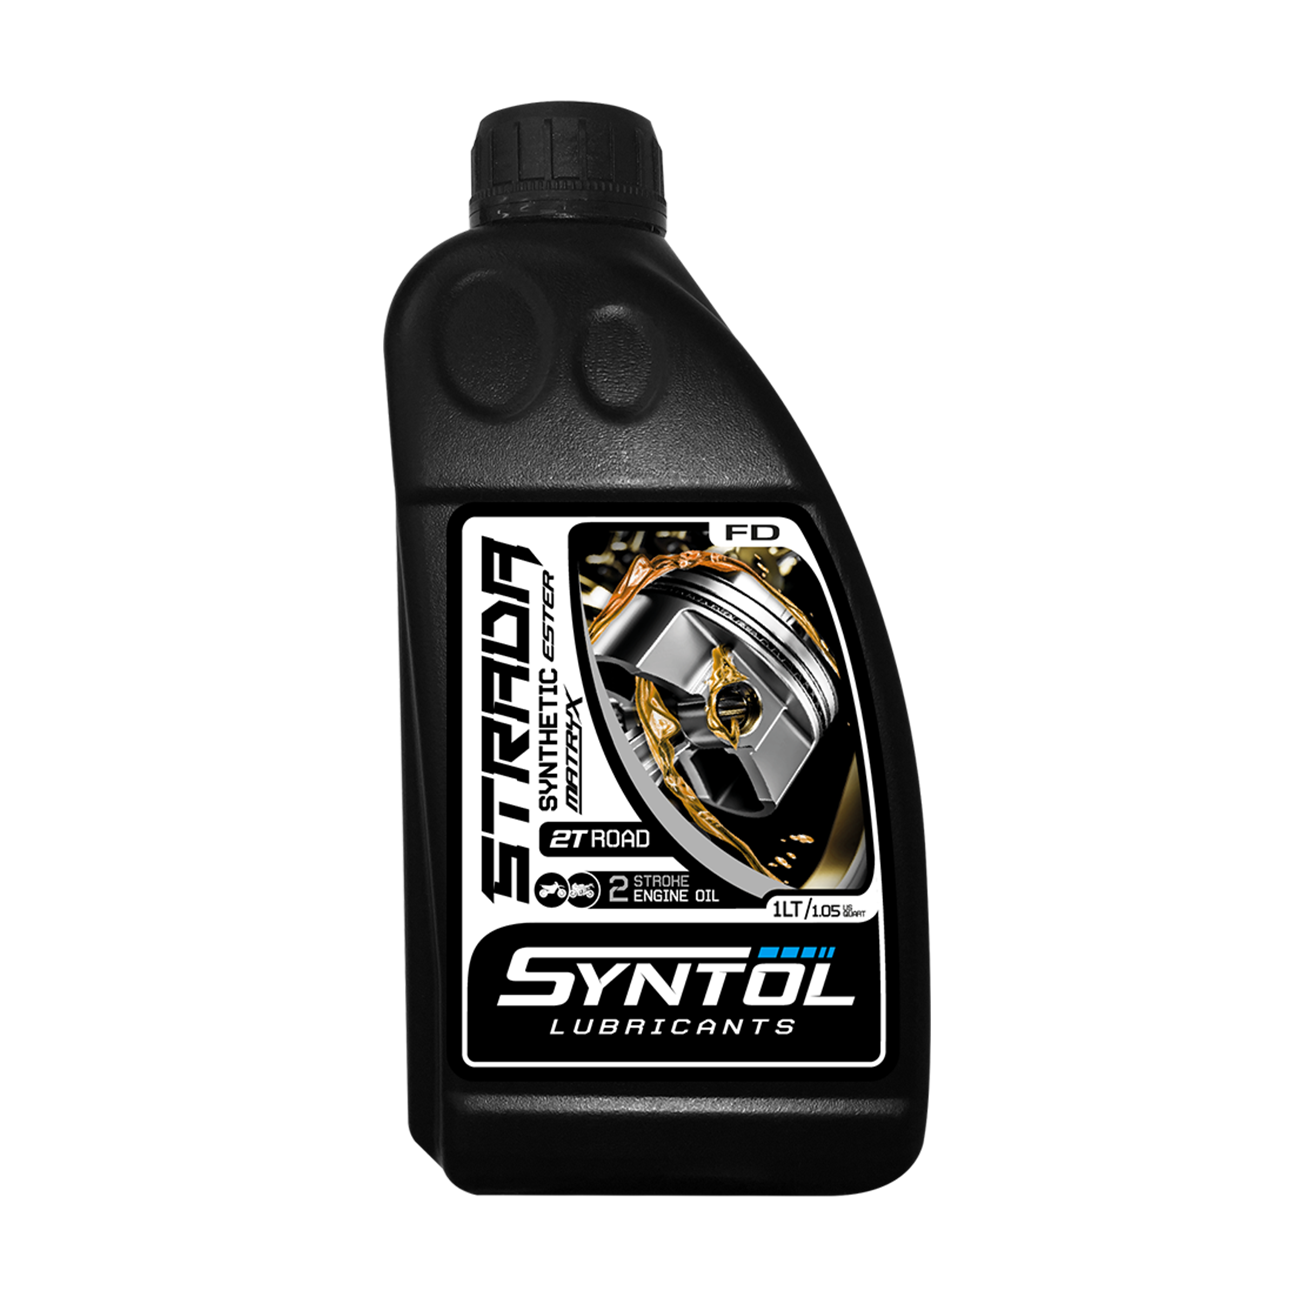 Syntol Strada 2T Motorcycle Engine Oil - 1 Litre-F0043-1-Oils and Lubricants-Pyramid Motorcycle Accessories